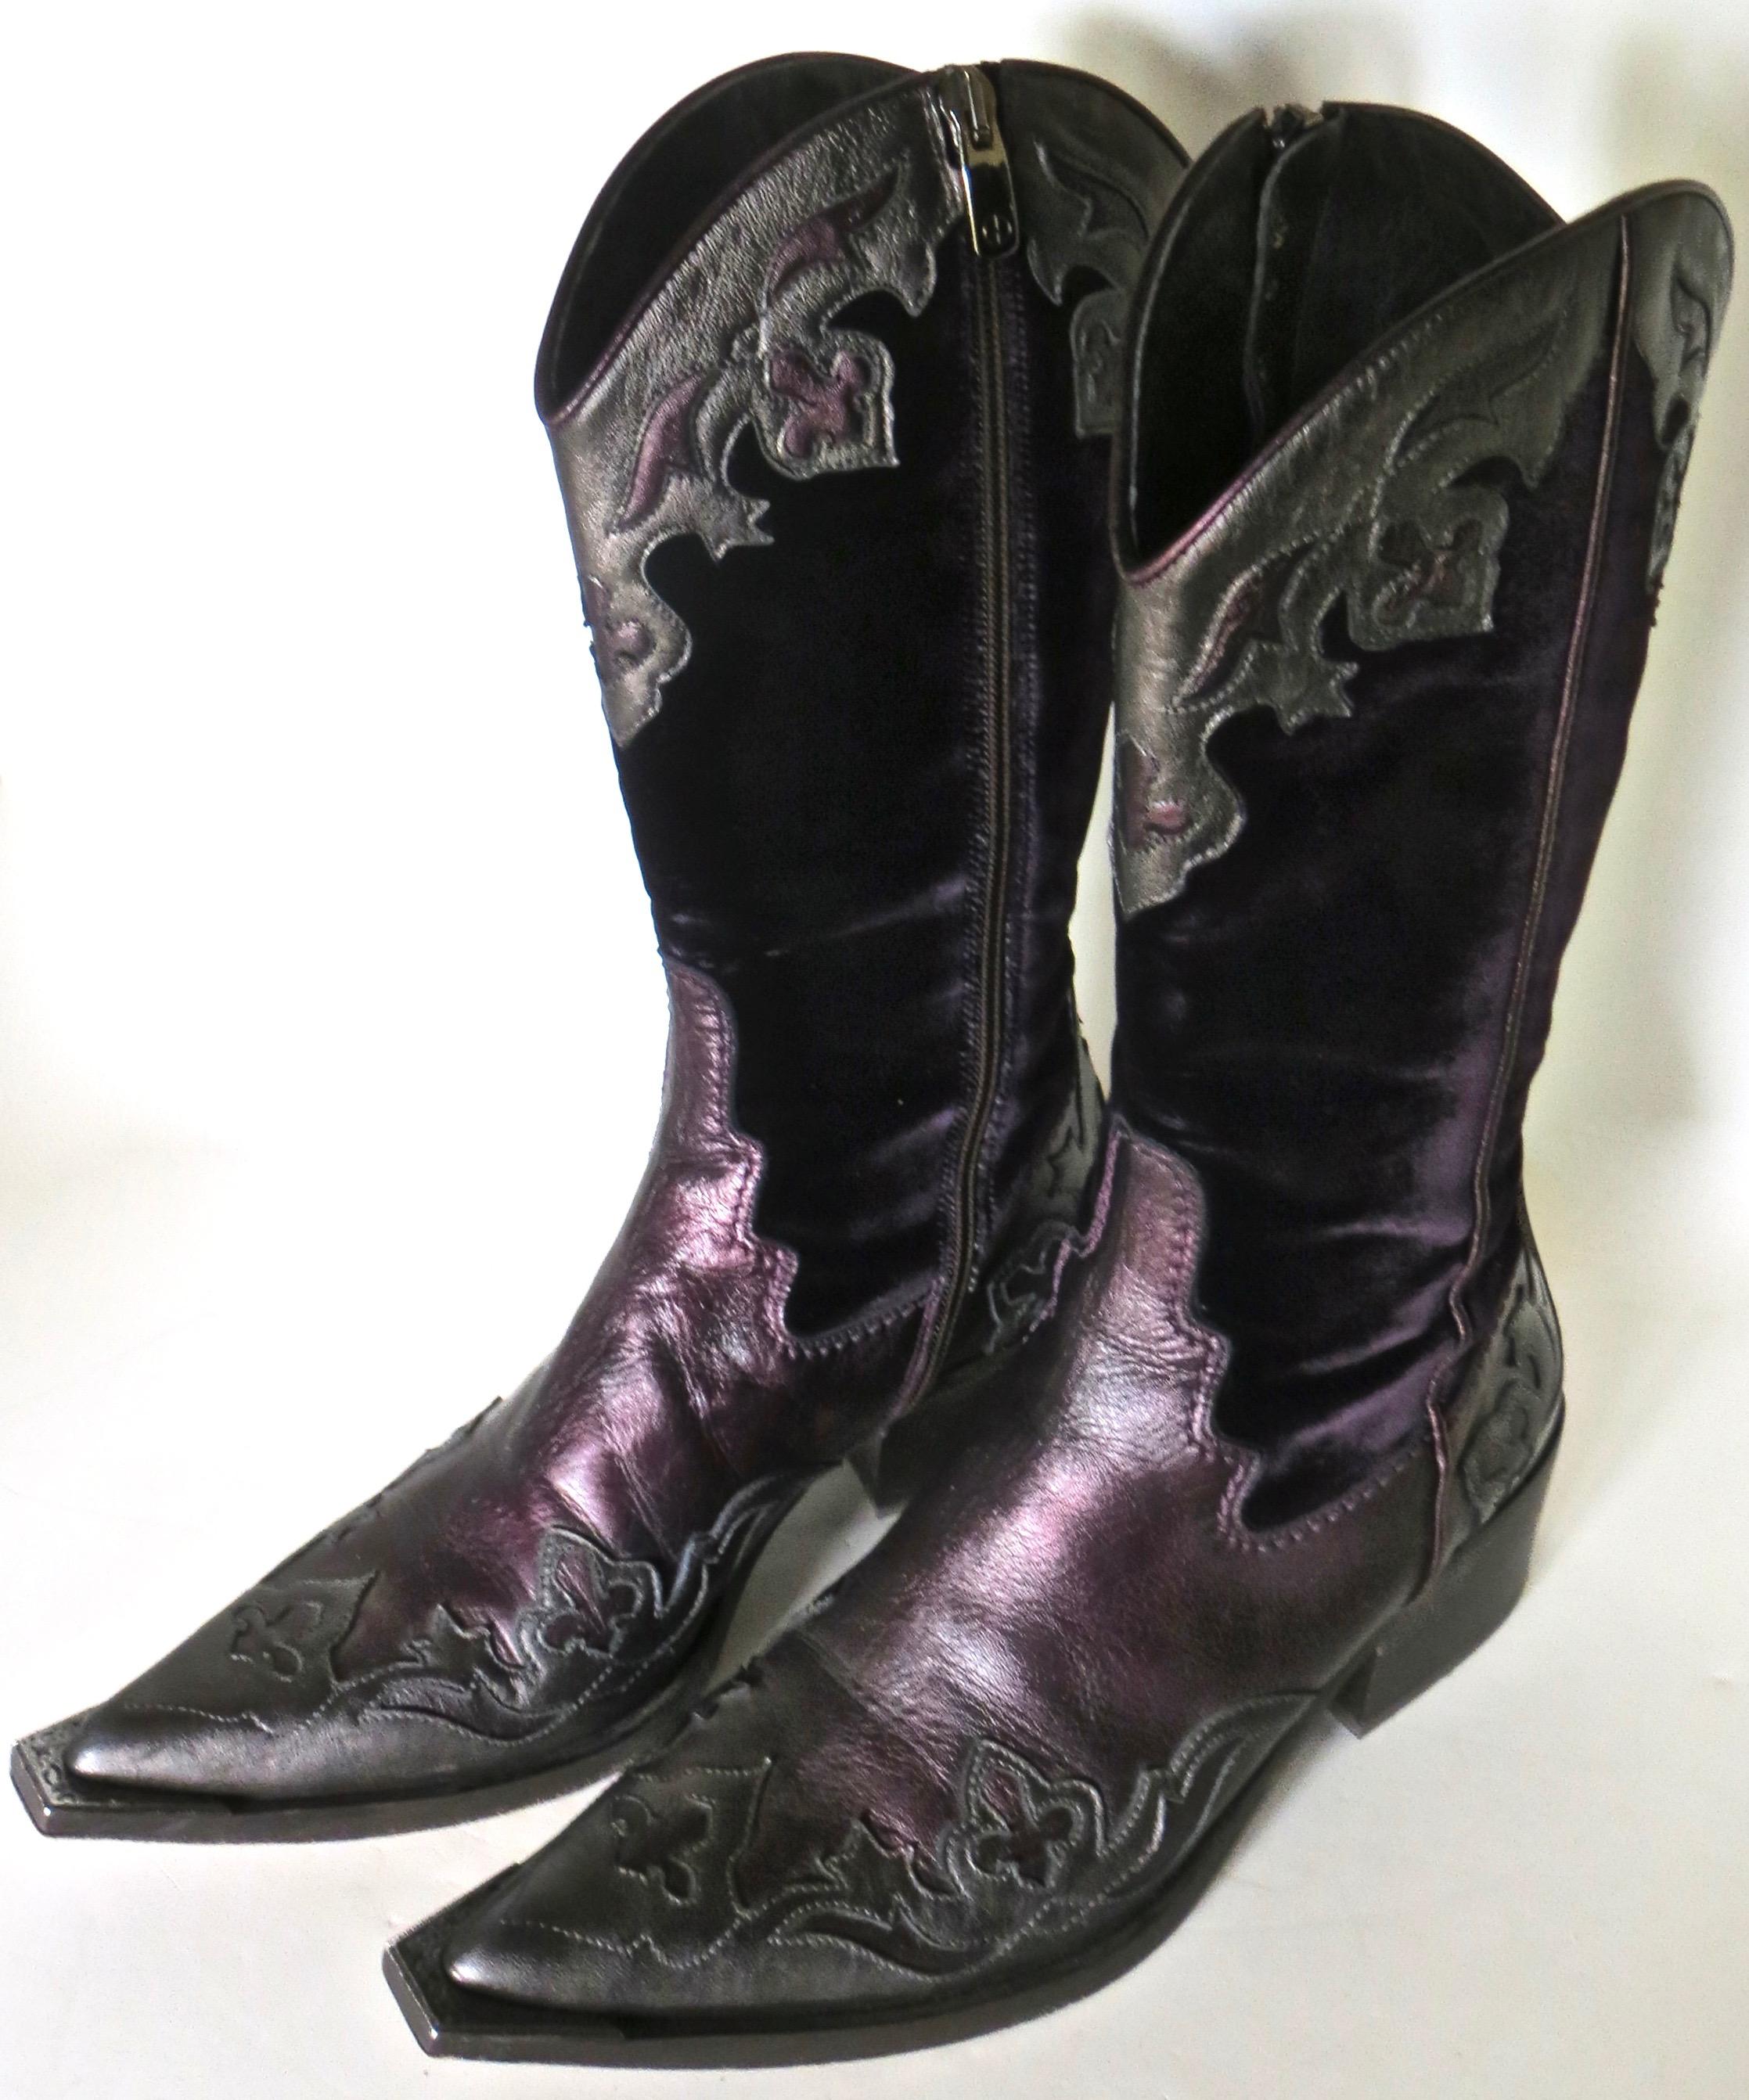 Circa 2000 beautiful and well made lady's western boots designed and manufactured by Donald J. Pliner; famous Italian luxury footwear designer.
Tool and dyed purple leather design with velvet side panels and full length zipper for 